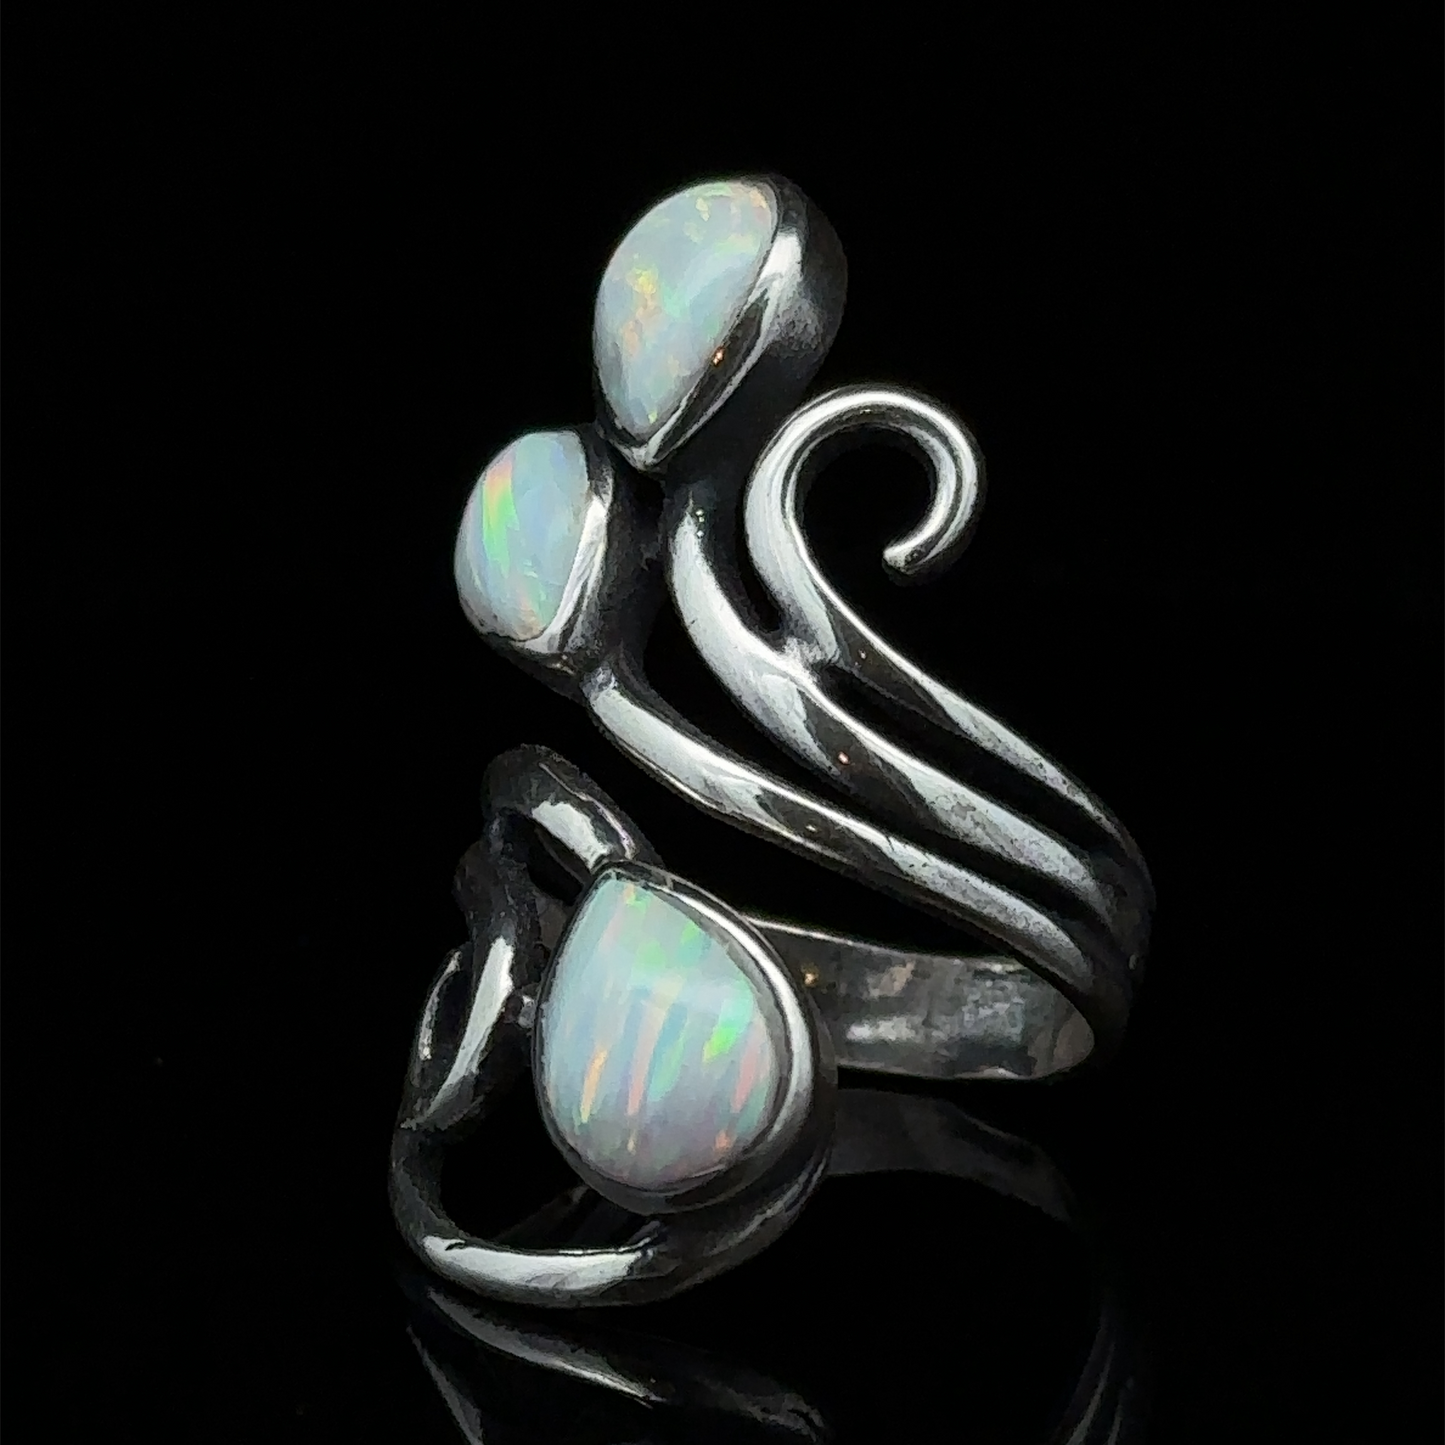 
                  
                    A Stunning Wrap-Around Opal Ring featuring three white opal stones set in a swirling design against a black background.
                  
                